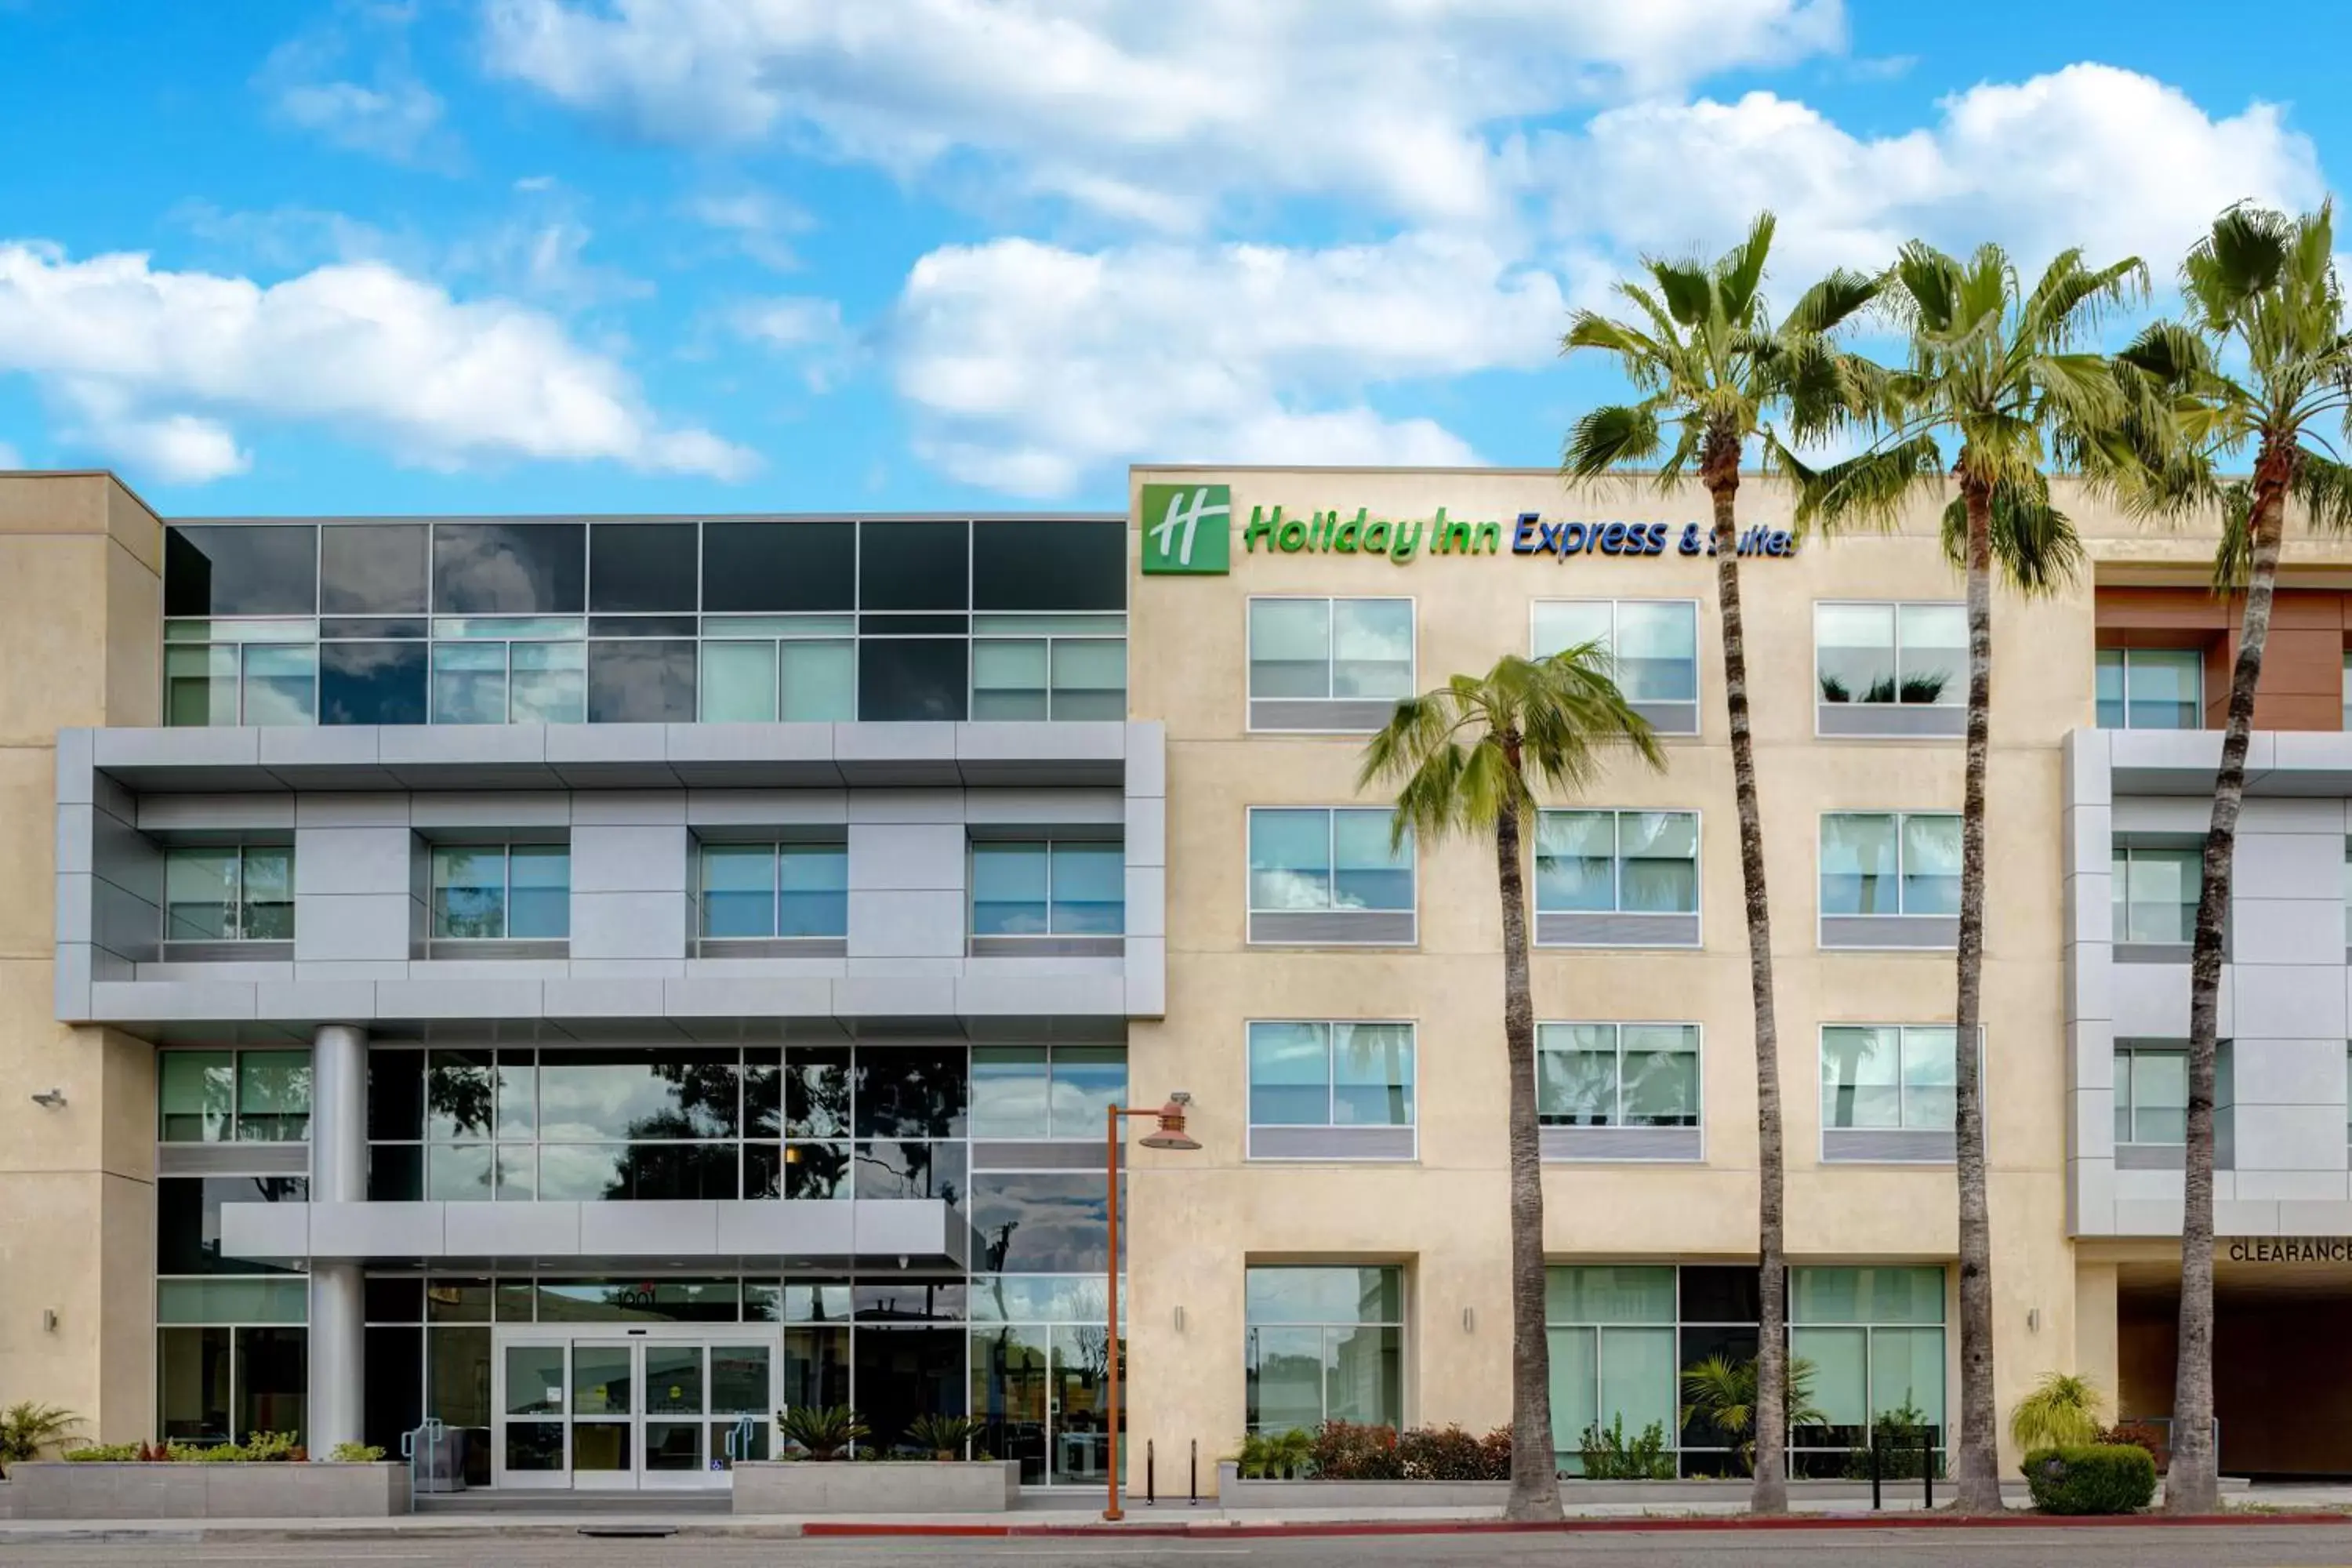 Property Building in Holiday Inn Express & Suites - Glendale Downtown